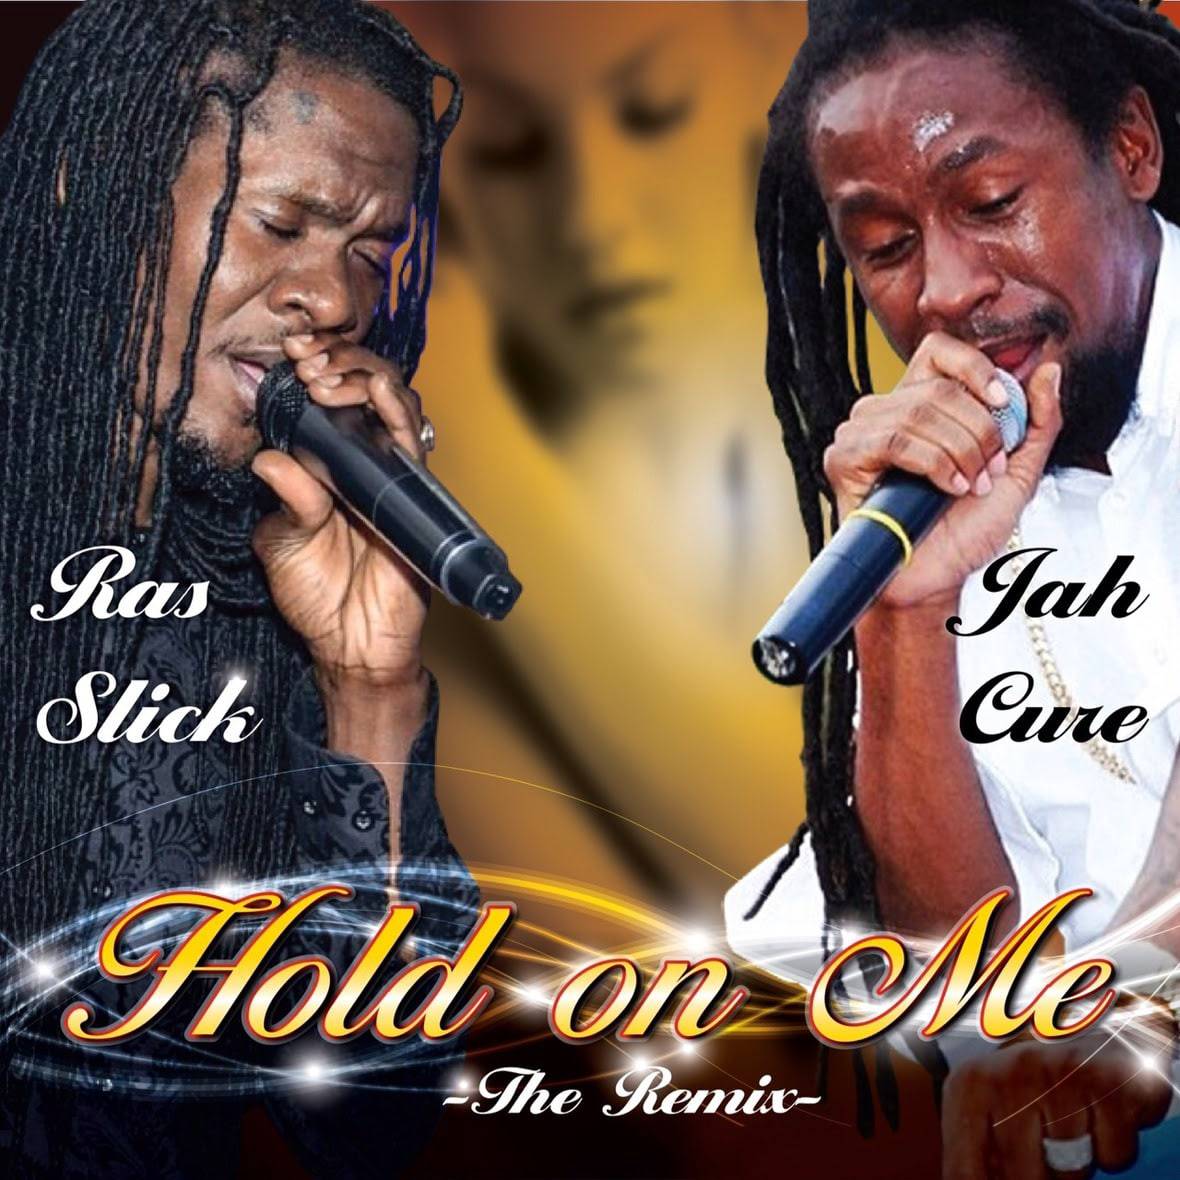 Ras Slick and Jah Cure Team Up for New Summer Scorcher 